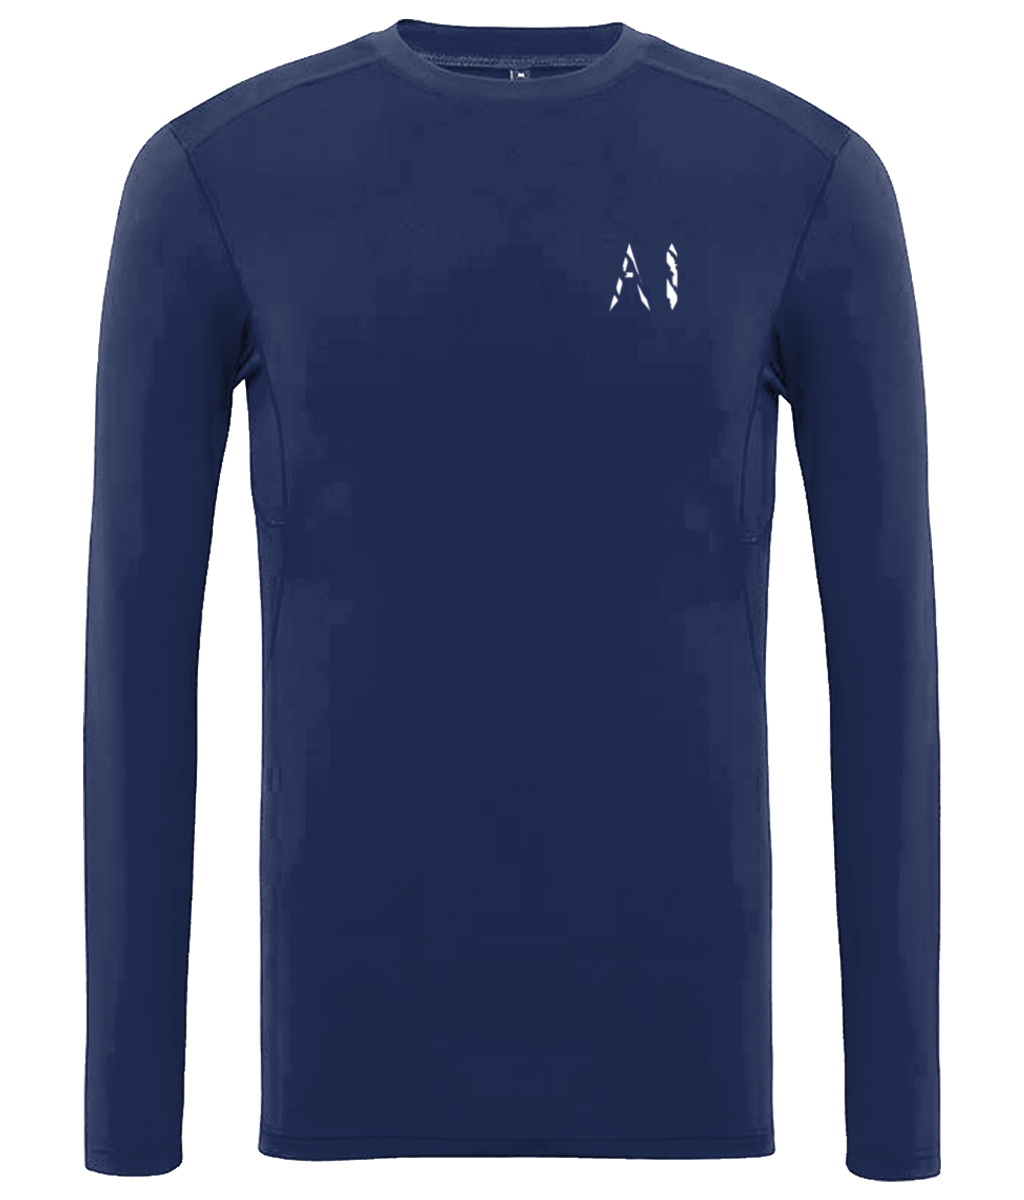 Mens navy blue Performance Baselayer with white AI logo on the left chest